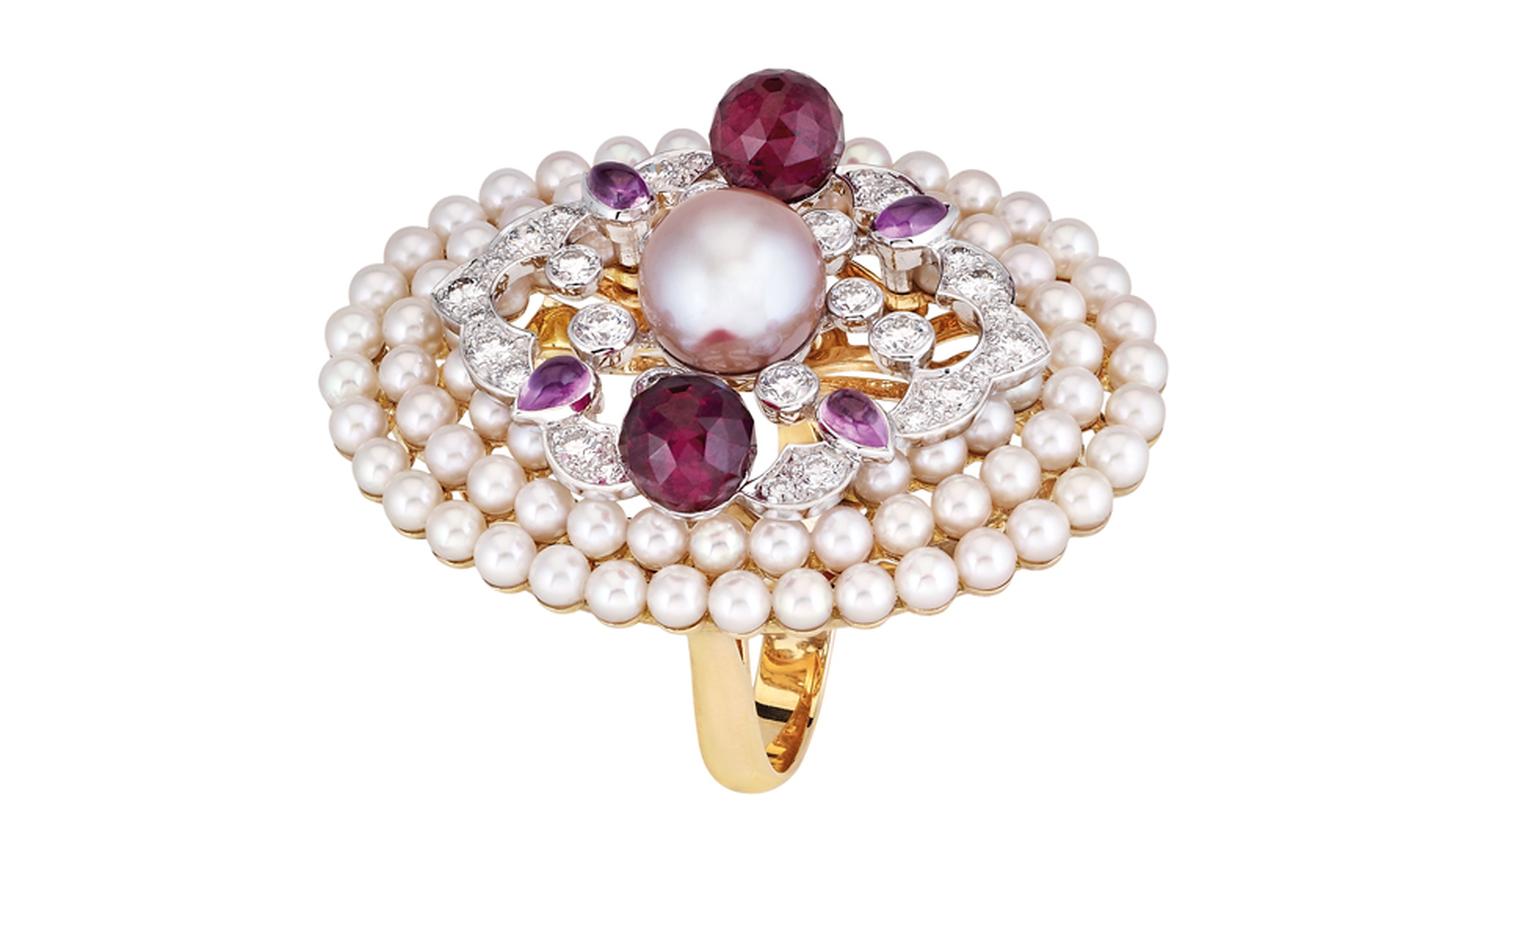 Chanel Secrets D'Orient Byzance Ring in 18 karat white and pink gold, diamonds, cultured pearls, pink sapphires and rubellites. POA